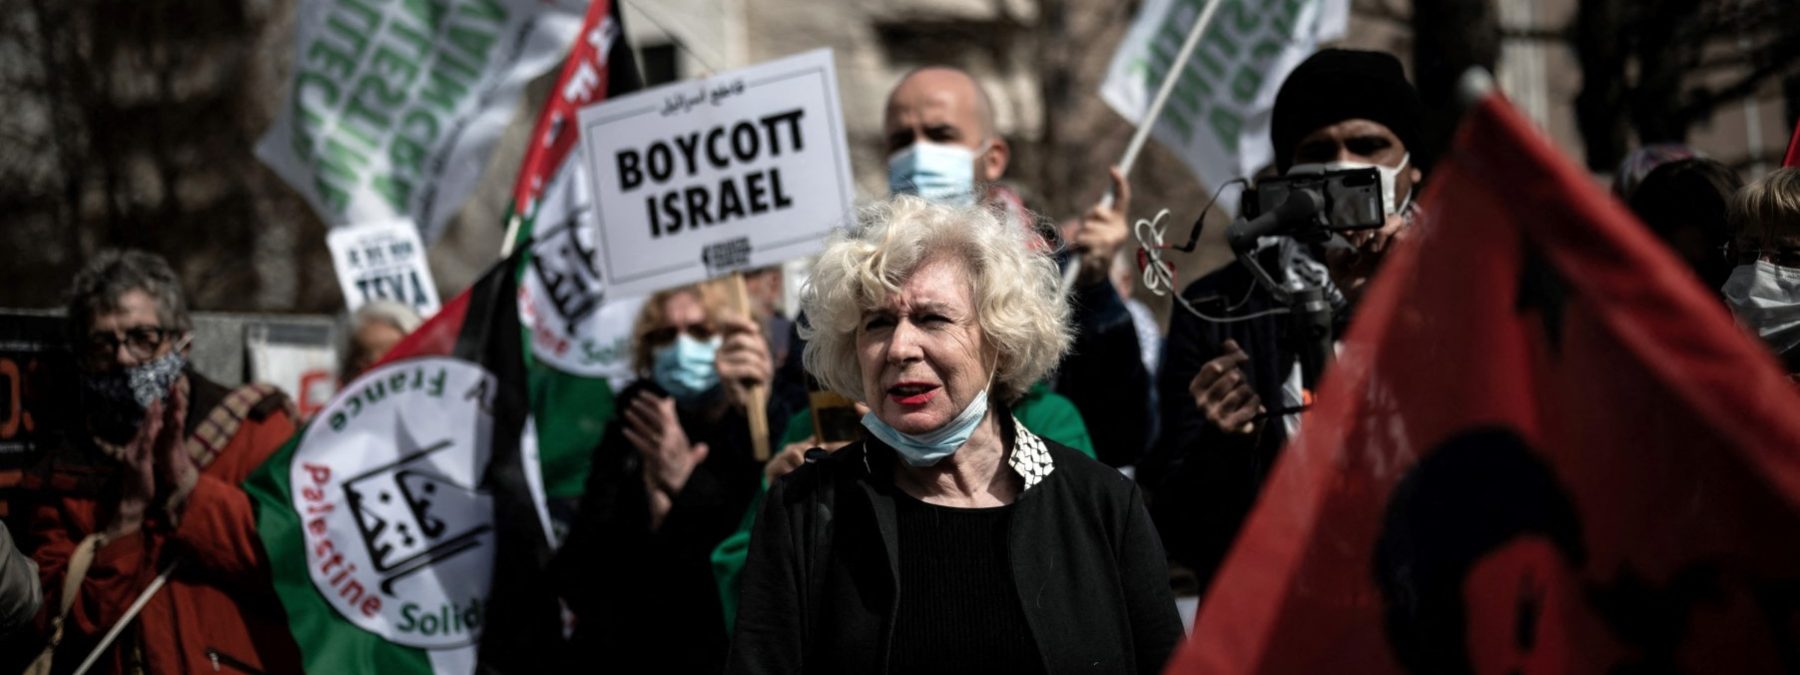 French political activist and director of publication of the Europalestine site Olivia Zemor takes part in a demonstration in front of Lyon's courthouse before attending her trial against Israeli pharmaceutical company TEVA on March 16, 2021. Olivia Zemor was summoned on March 16, 2021 in front the Lyon Criminal Court by the Israeli pharmaceutical company TEVA for having relayed a call for a boycott launched by activists of the Palestinian cause. She had reported, on her website, about the action that pro-Palestinian activists from Lyon took in front of the largest pharmacy in the city. An action that was part of the BDS movement ("boycott, divestment and sanctions"), a global campaign of economic, cultural or scientific boycott of Israel, aimed at obtaining the end of the Israeli occupation and colonisation of the Palestinians Territories . (Photo by JEFF PACHOUD / AFP)